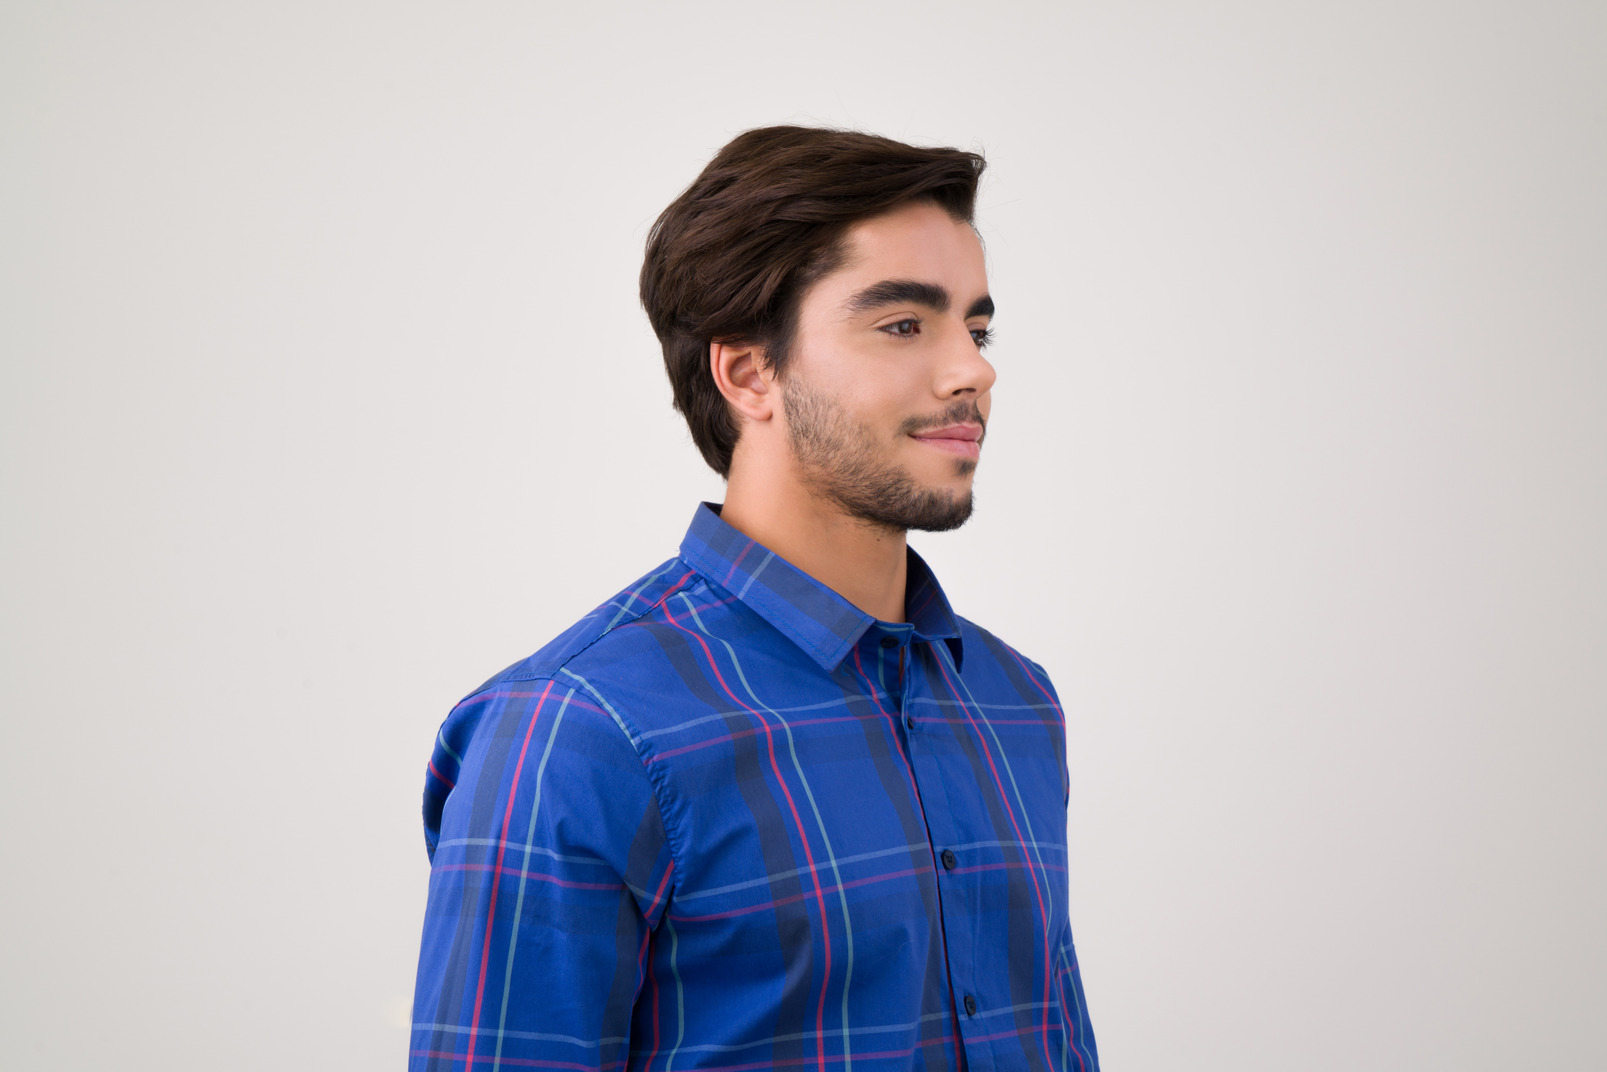 Young handsome man in a blue shirt